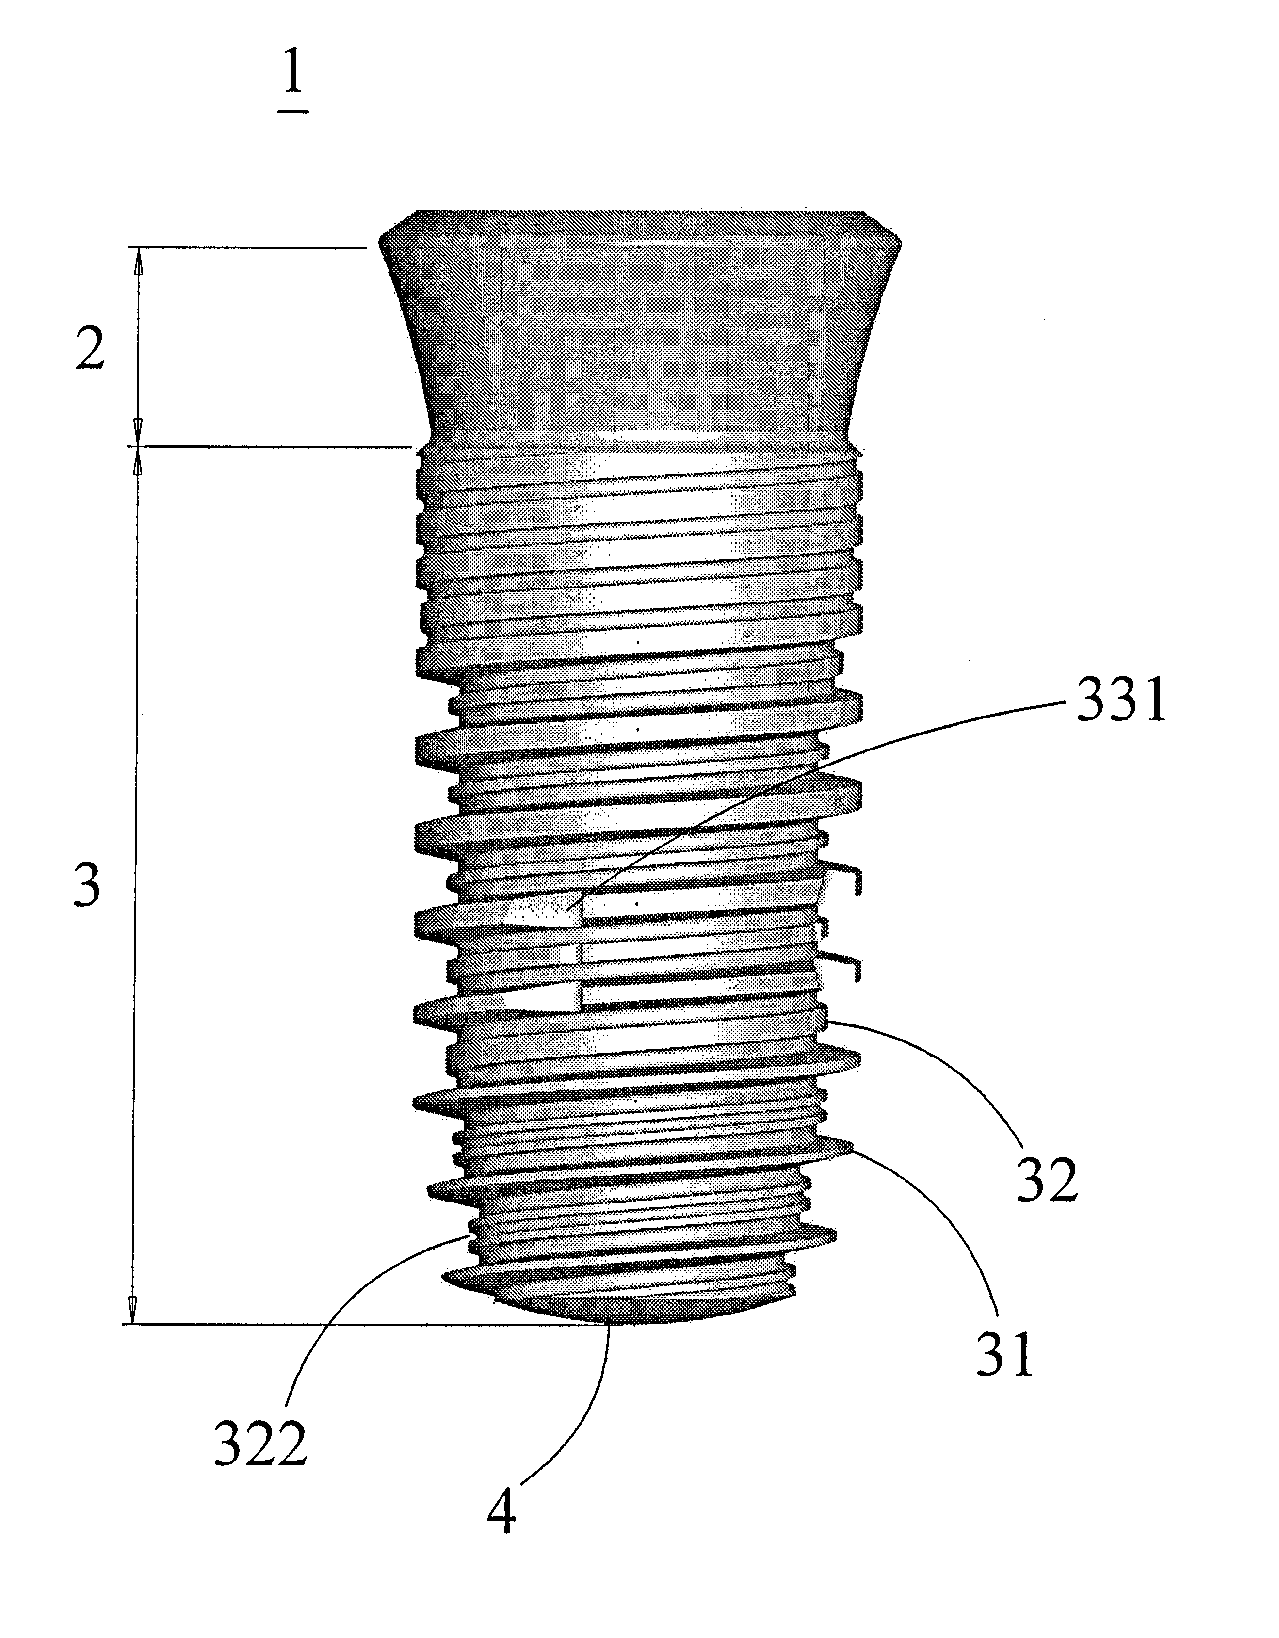 Artificial root for dental implantation and method for manufacturing the same